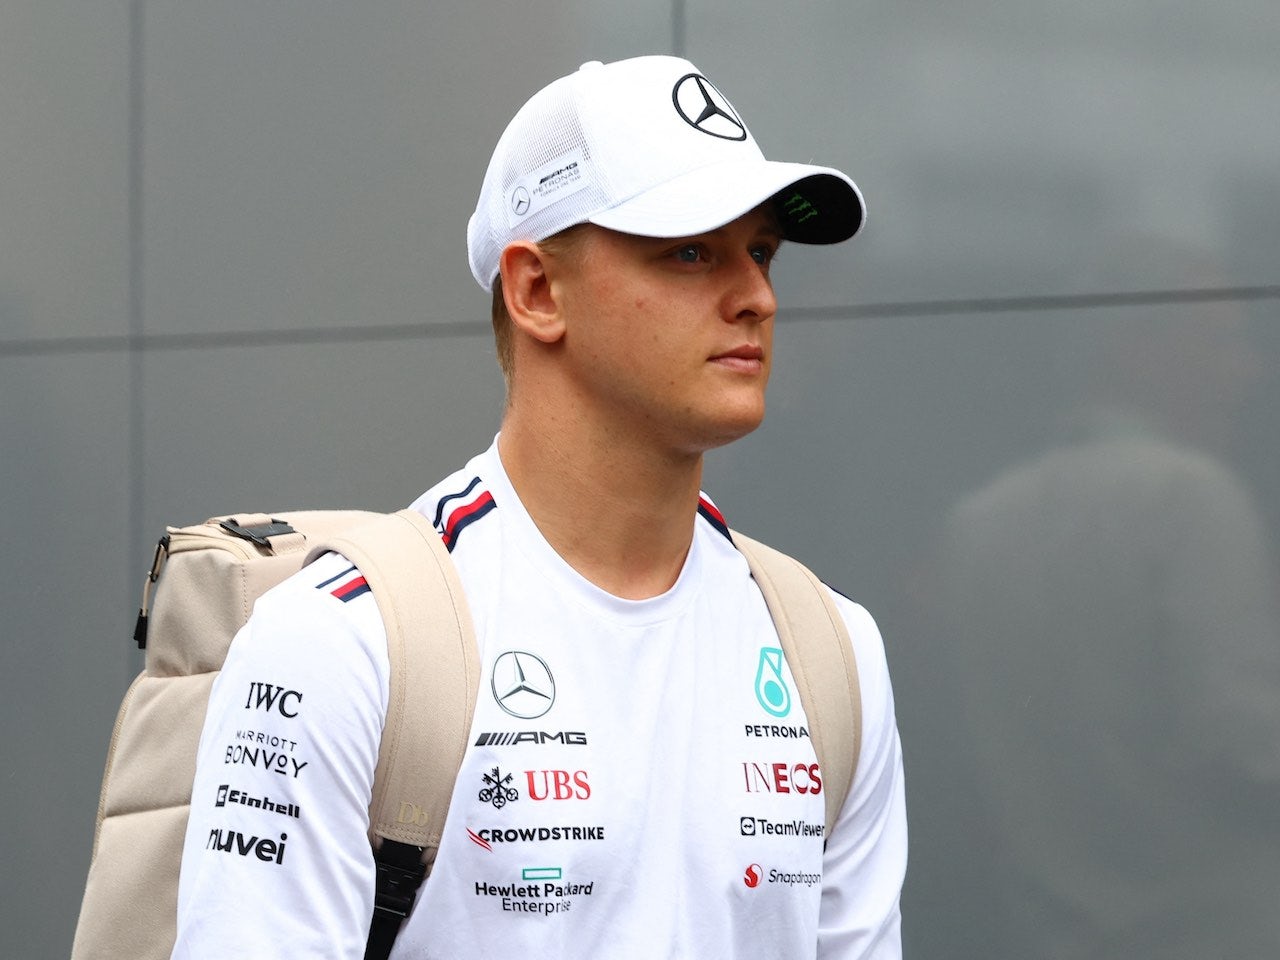 Le Mans no 'replacement' for Schumacher - Hulkenberg